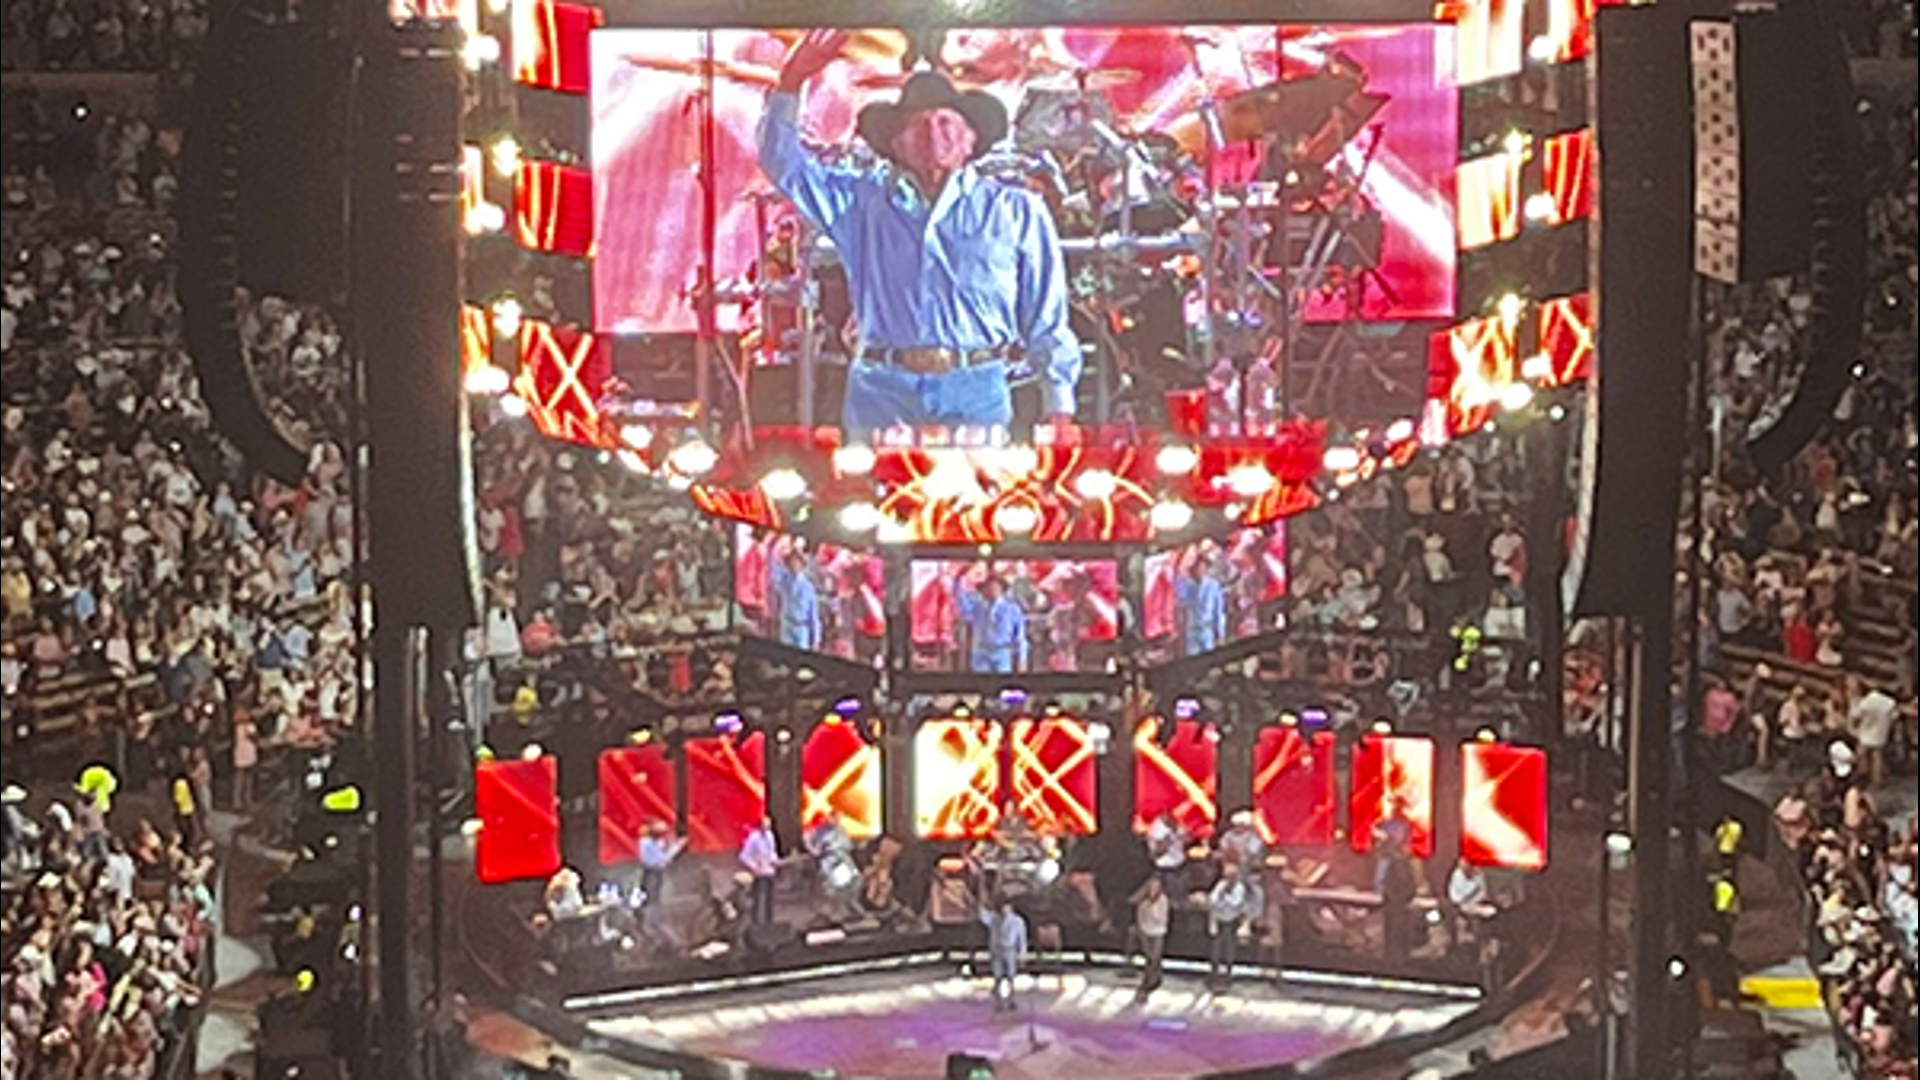 This video is of Parker McCollum before Strait took the stage.  During his performance, Strait said that more than 110,000 people were in attendance.